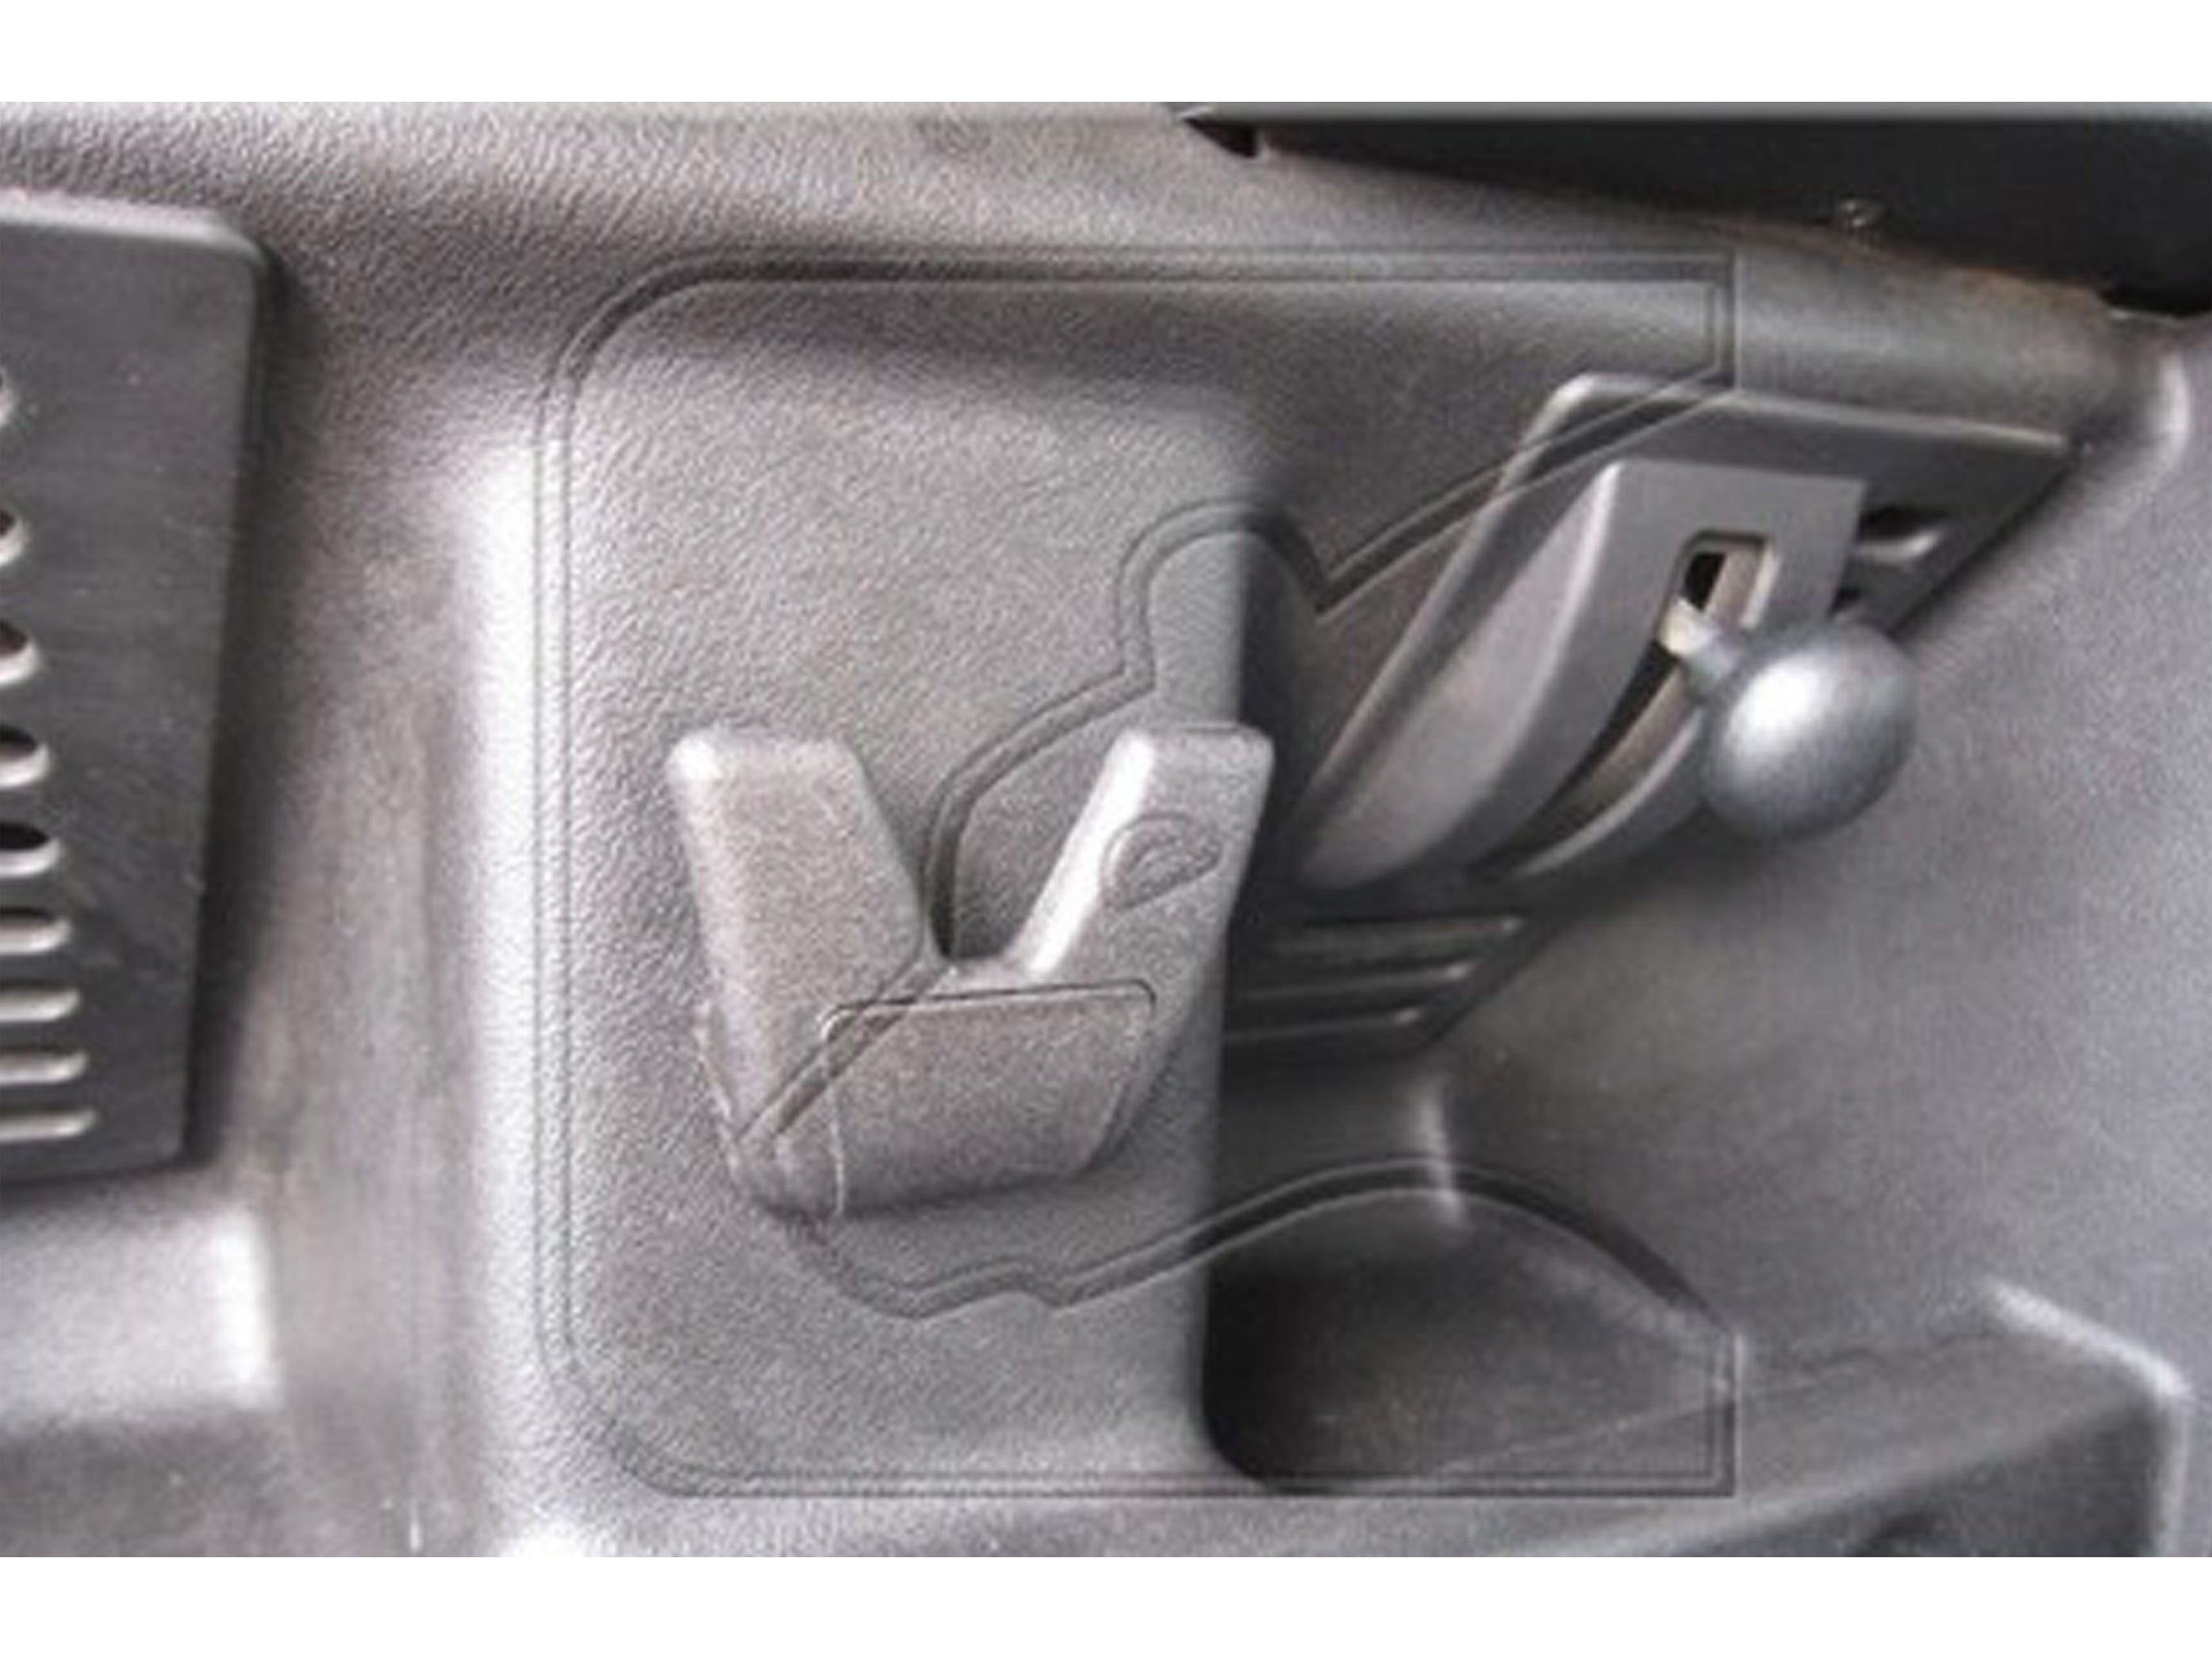 "Curry Hook" Shopping bag holder, double hook (interior) - for Land Rover Defender 90/110/130